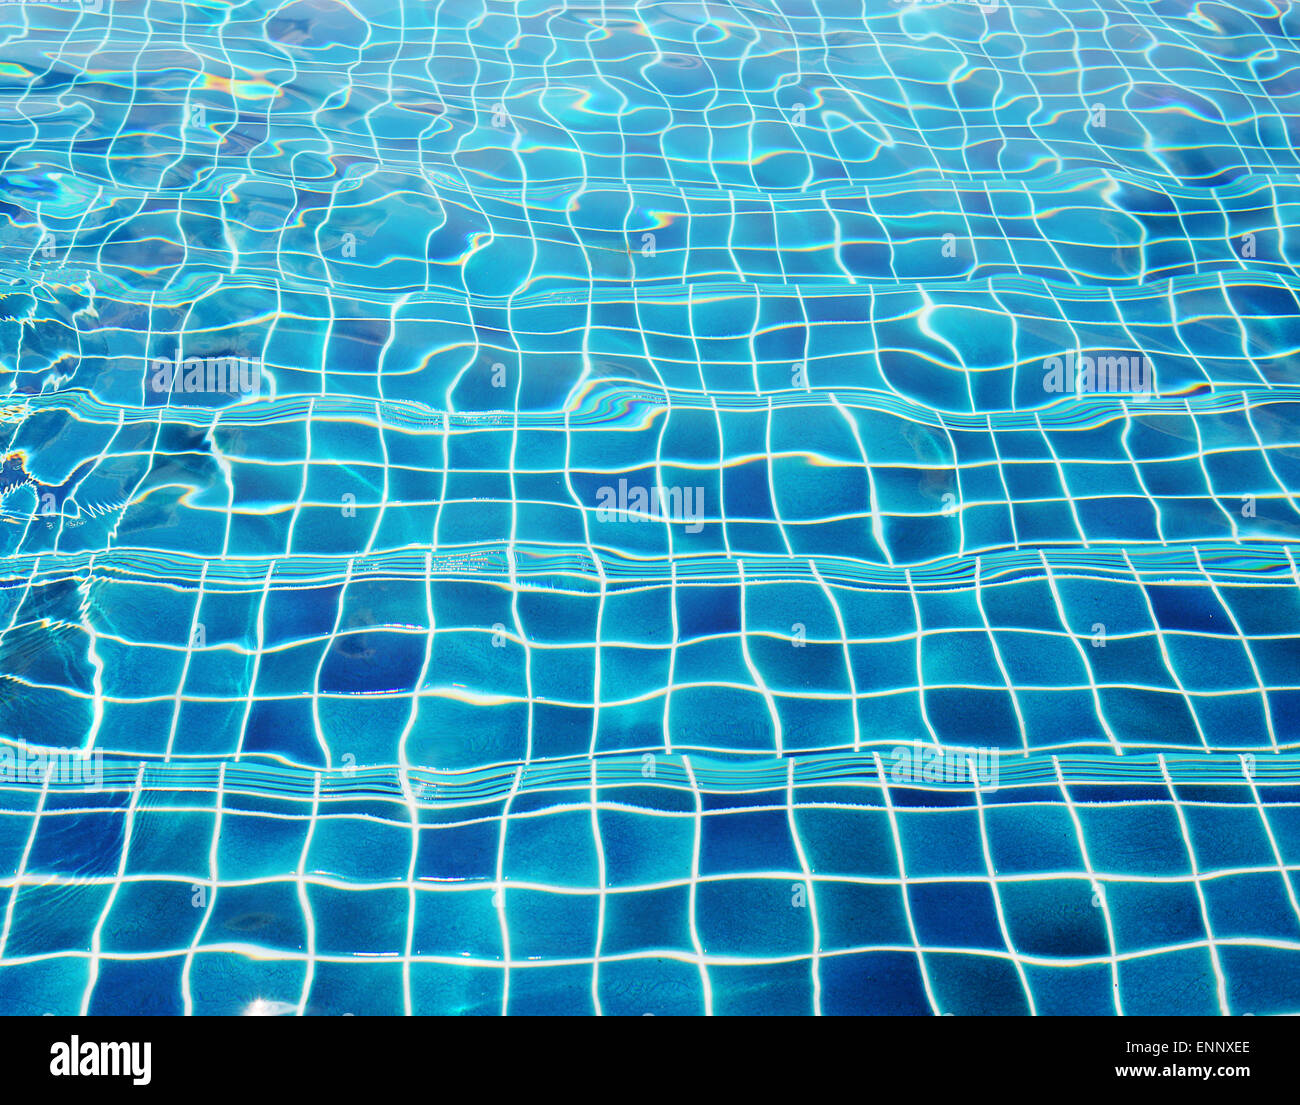 Blue ceramic wall tiles and details of surface on swimming pool background Stock Photo